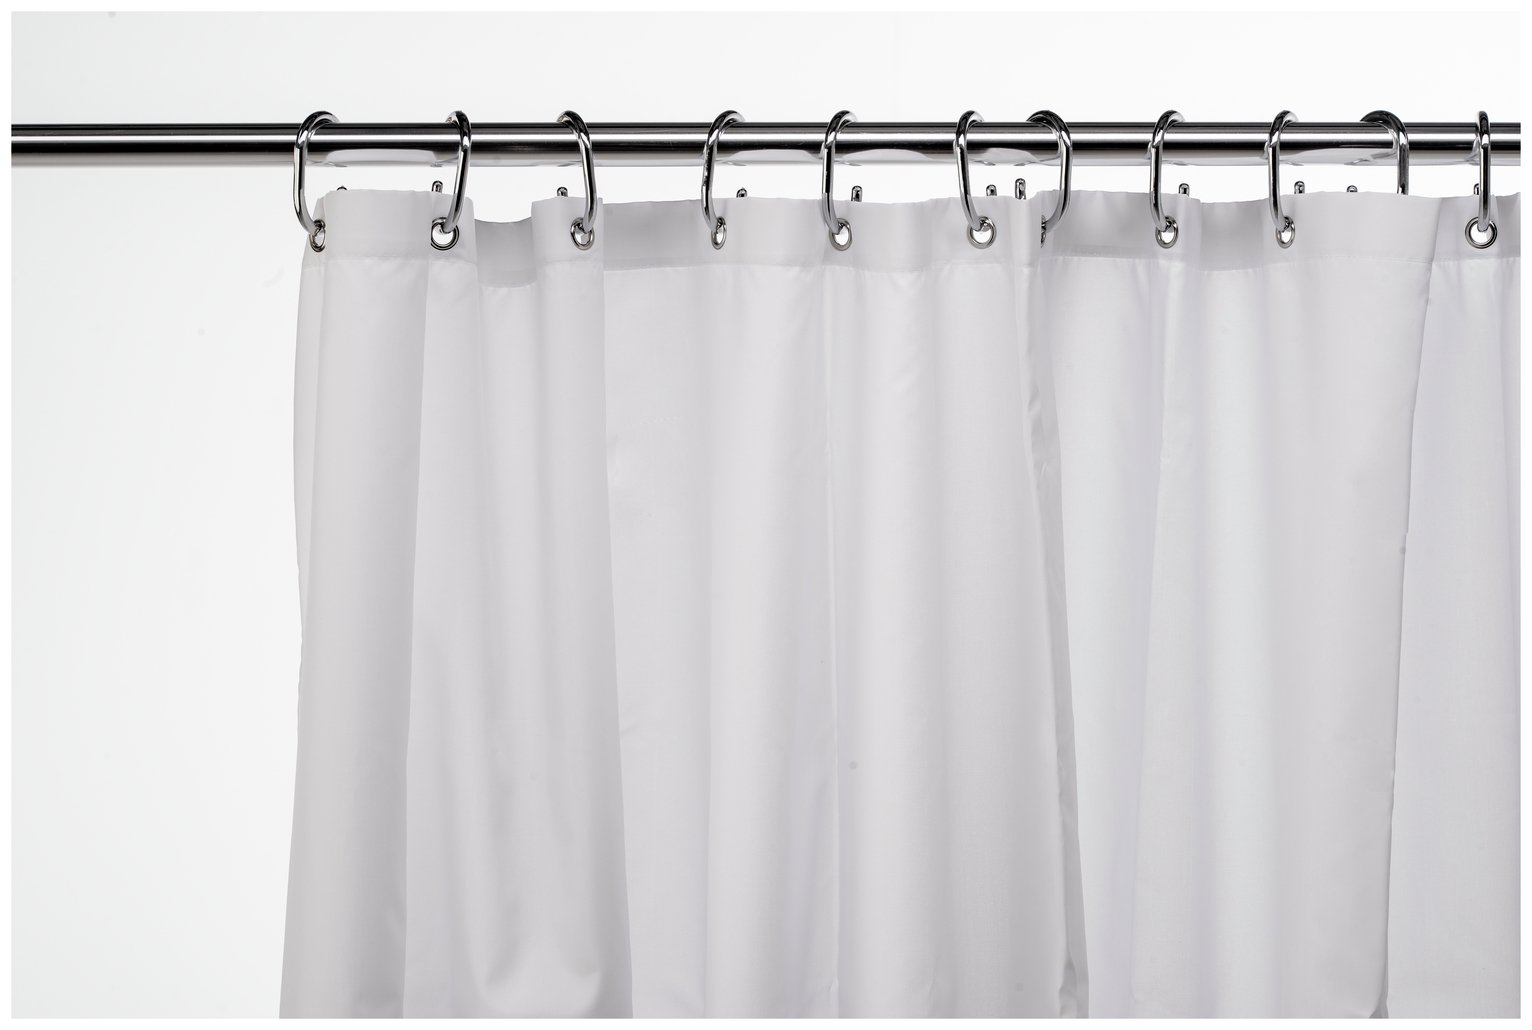 Croydex Superline Shower Curtain Rod & Rings Set Review